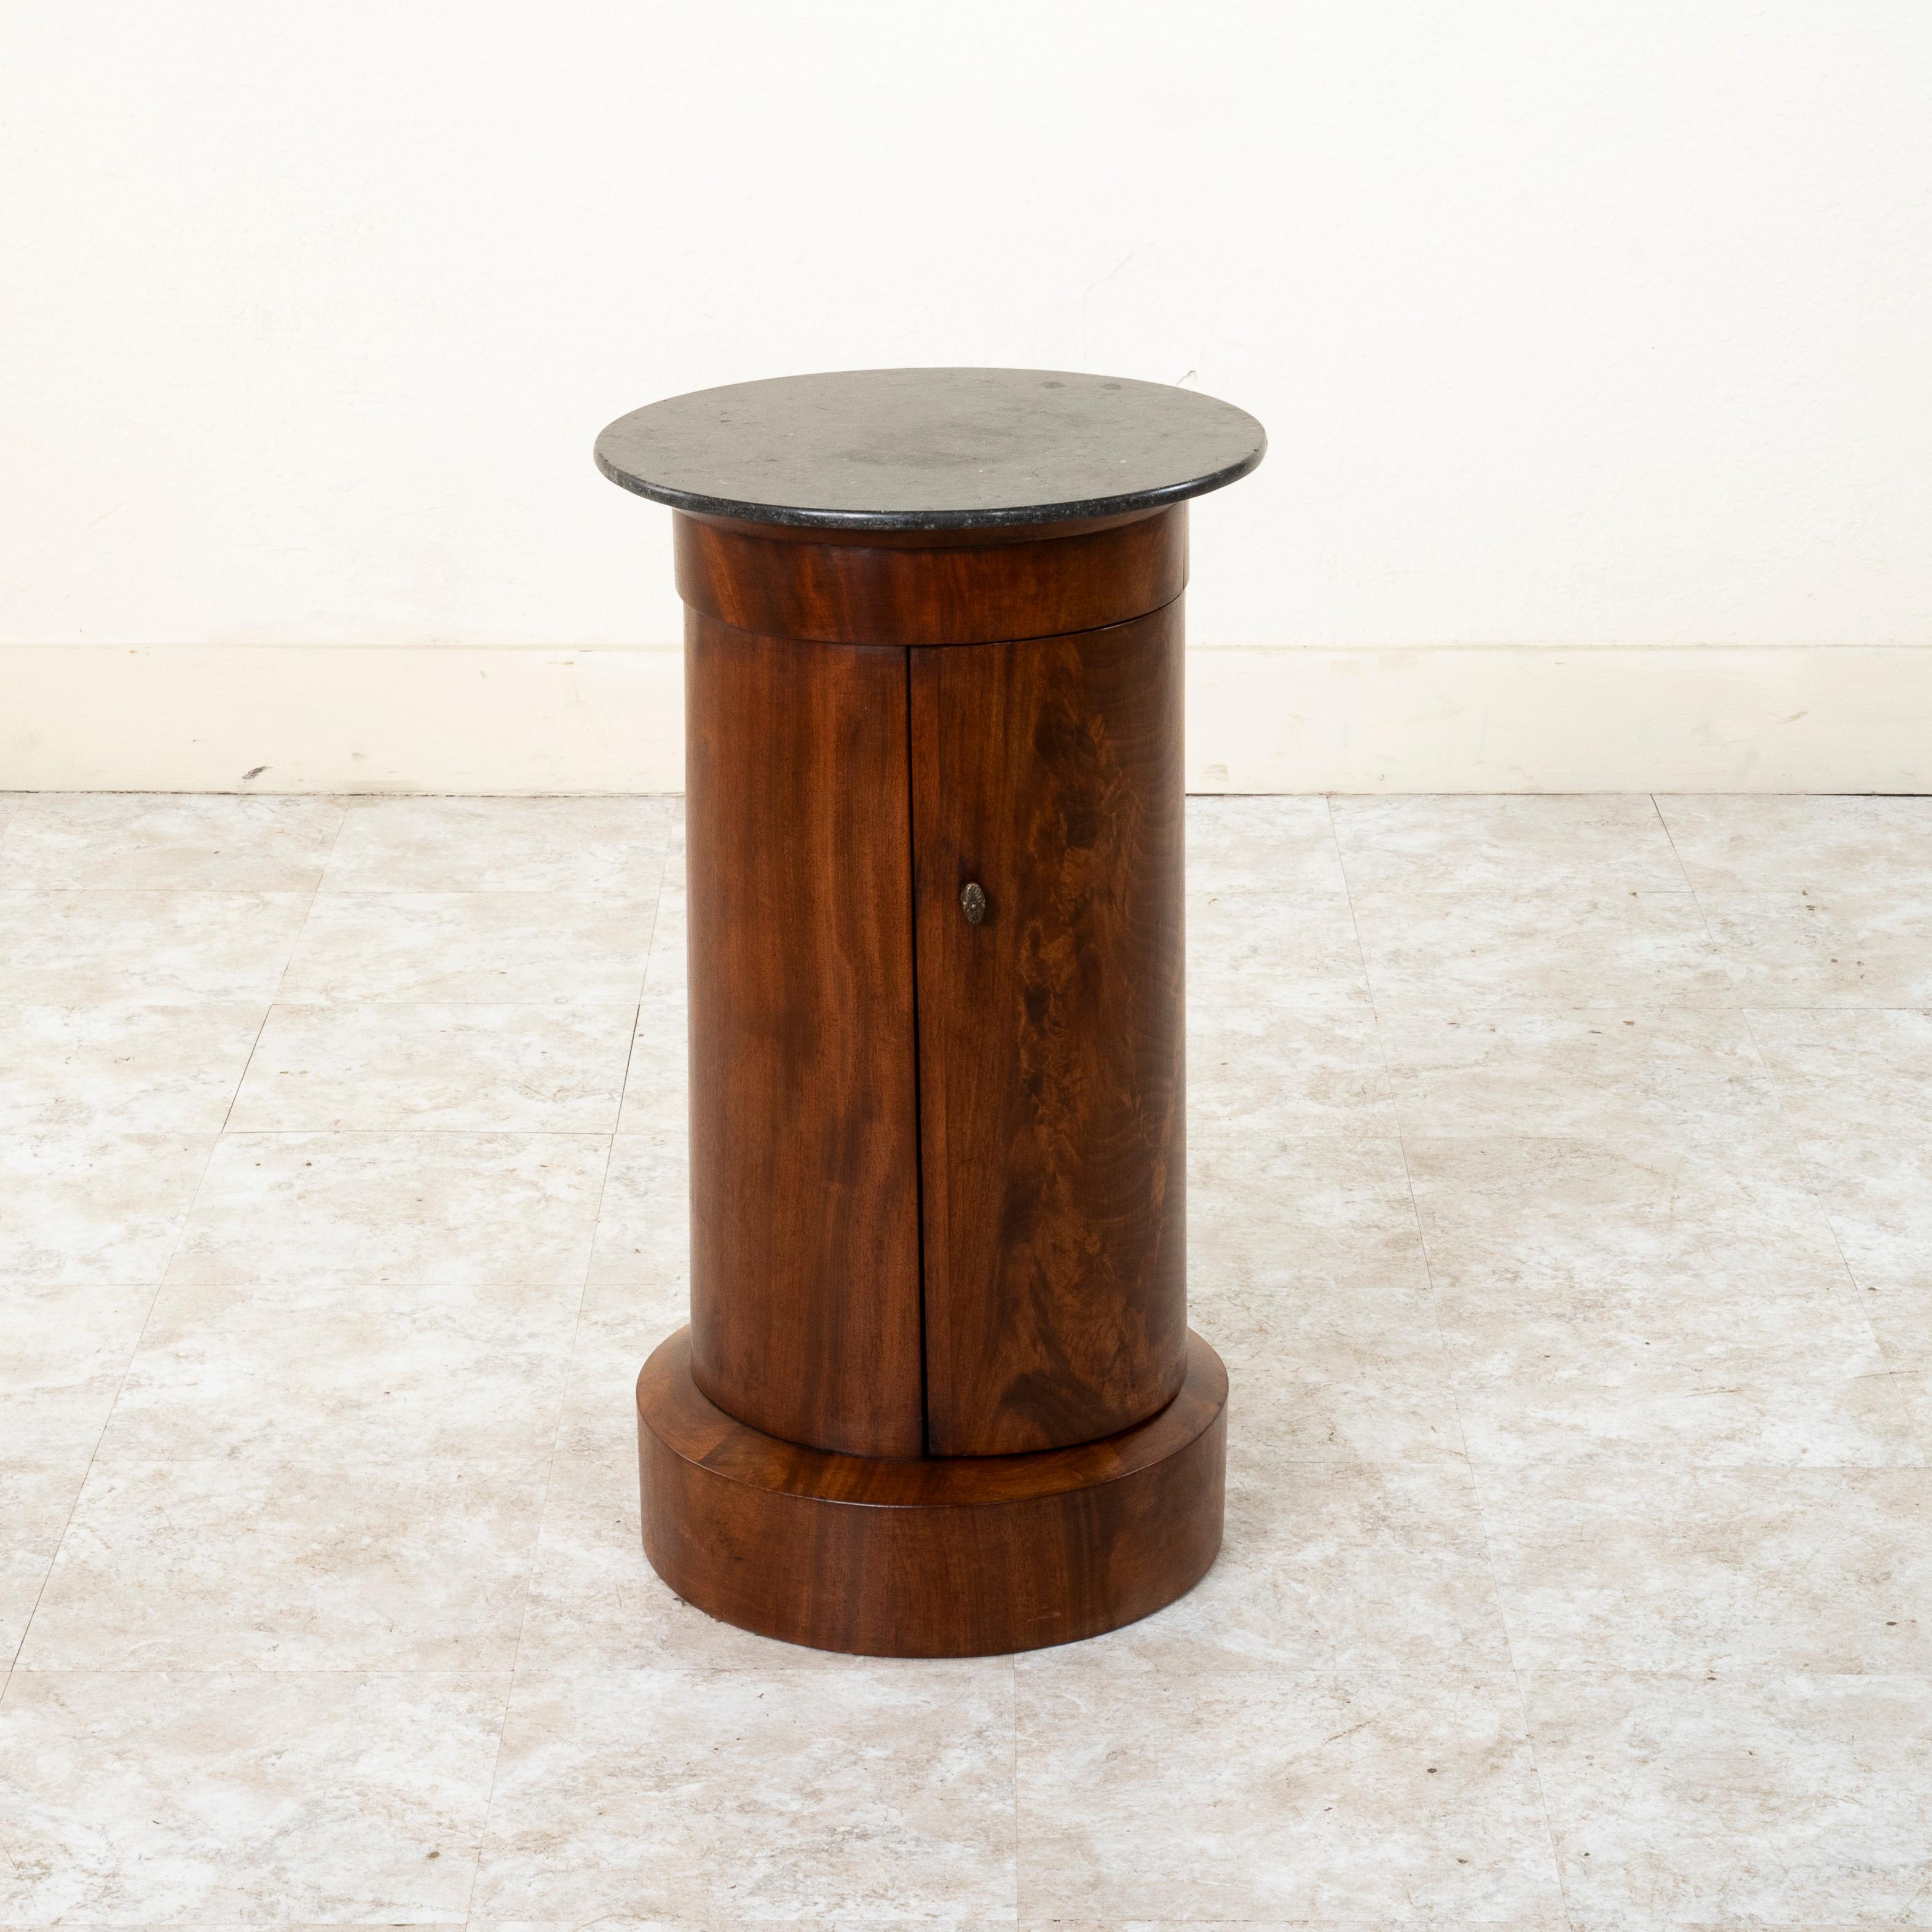 This handsome French Empire period mahogany somno or drum table features a black marble top and a hinged curved door with bronze pull. Its cylindrical form and clean lines lend a refined yet modern character. Its interior has two shelves one of